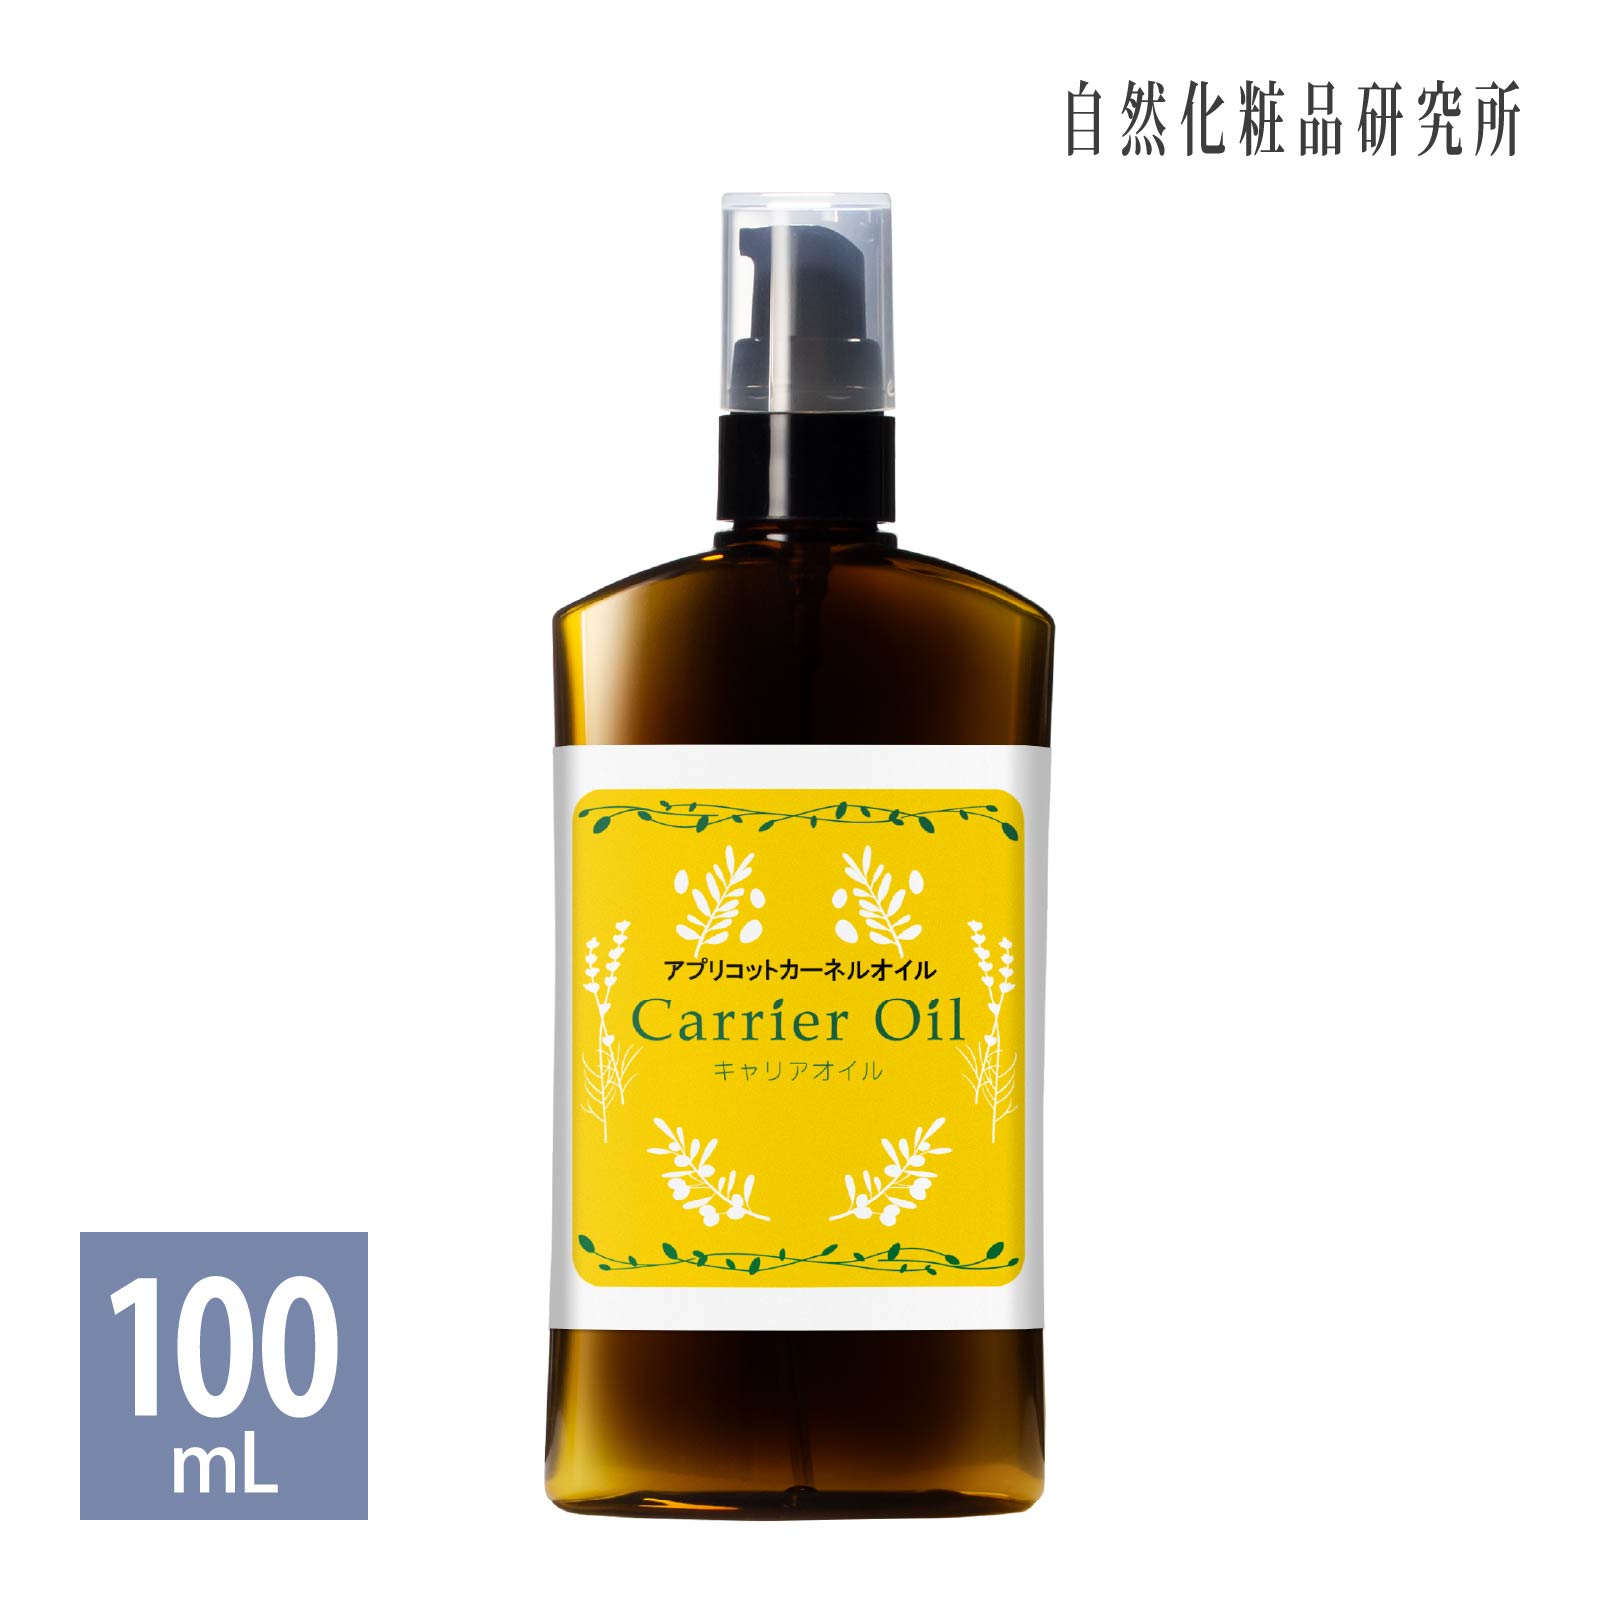  apricot kernel oil 100ml pump bottle .. oil no addition . made apricot oil pa- Schic oil carrier oil skin care beauty oil 